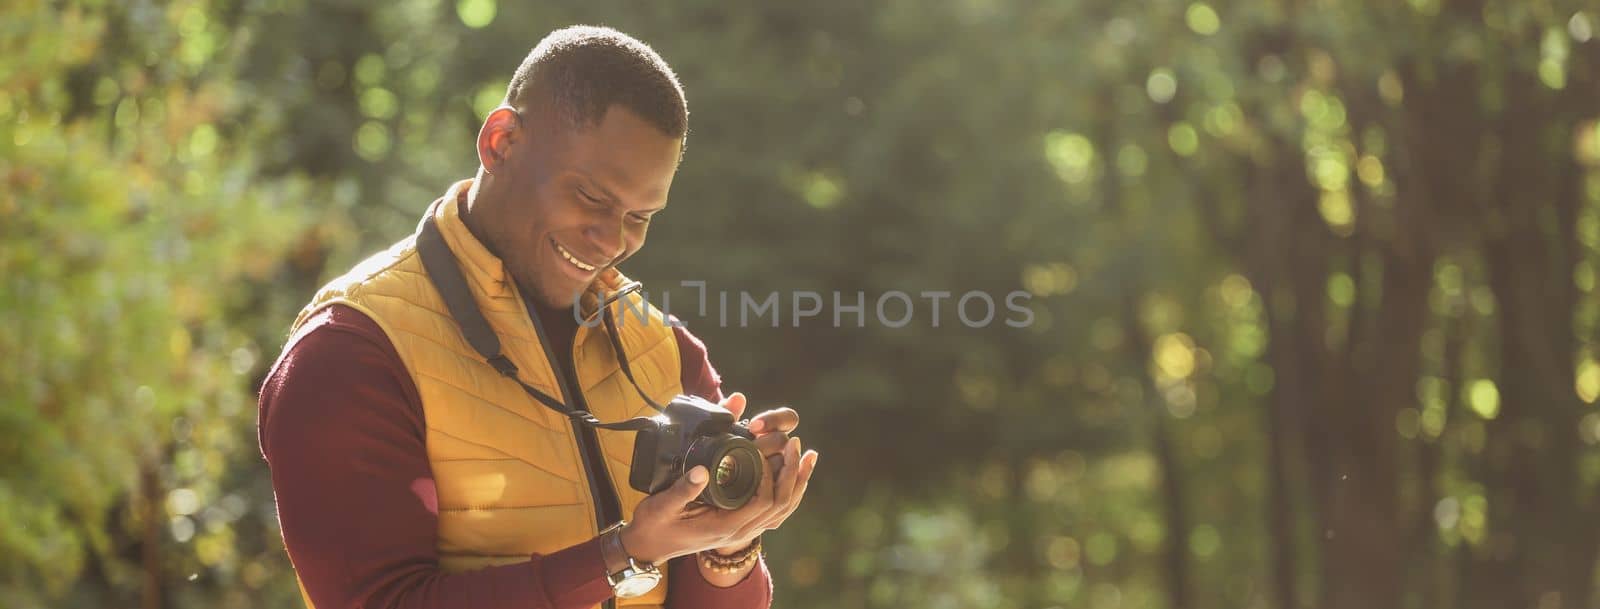 Banner african american guy photographer taking picture with photo camera on city green park copy space and place for text - leisure activity, diversity and hobby concept by Satura86